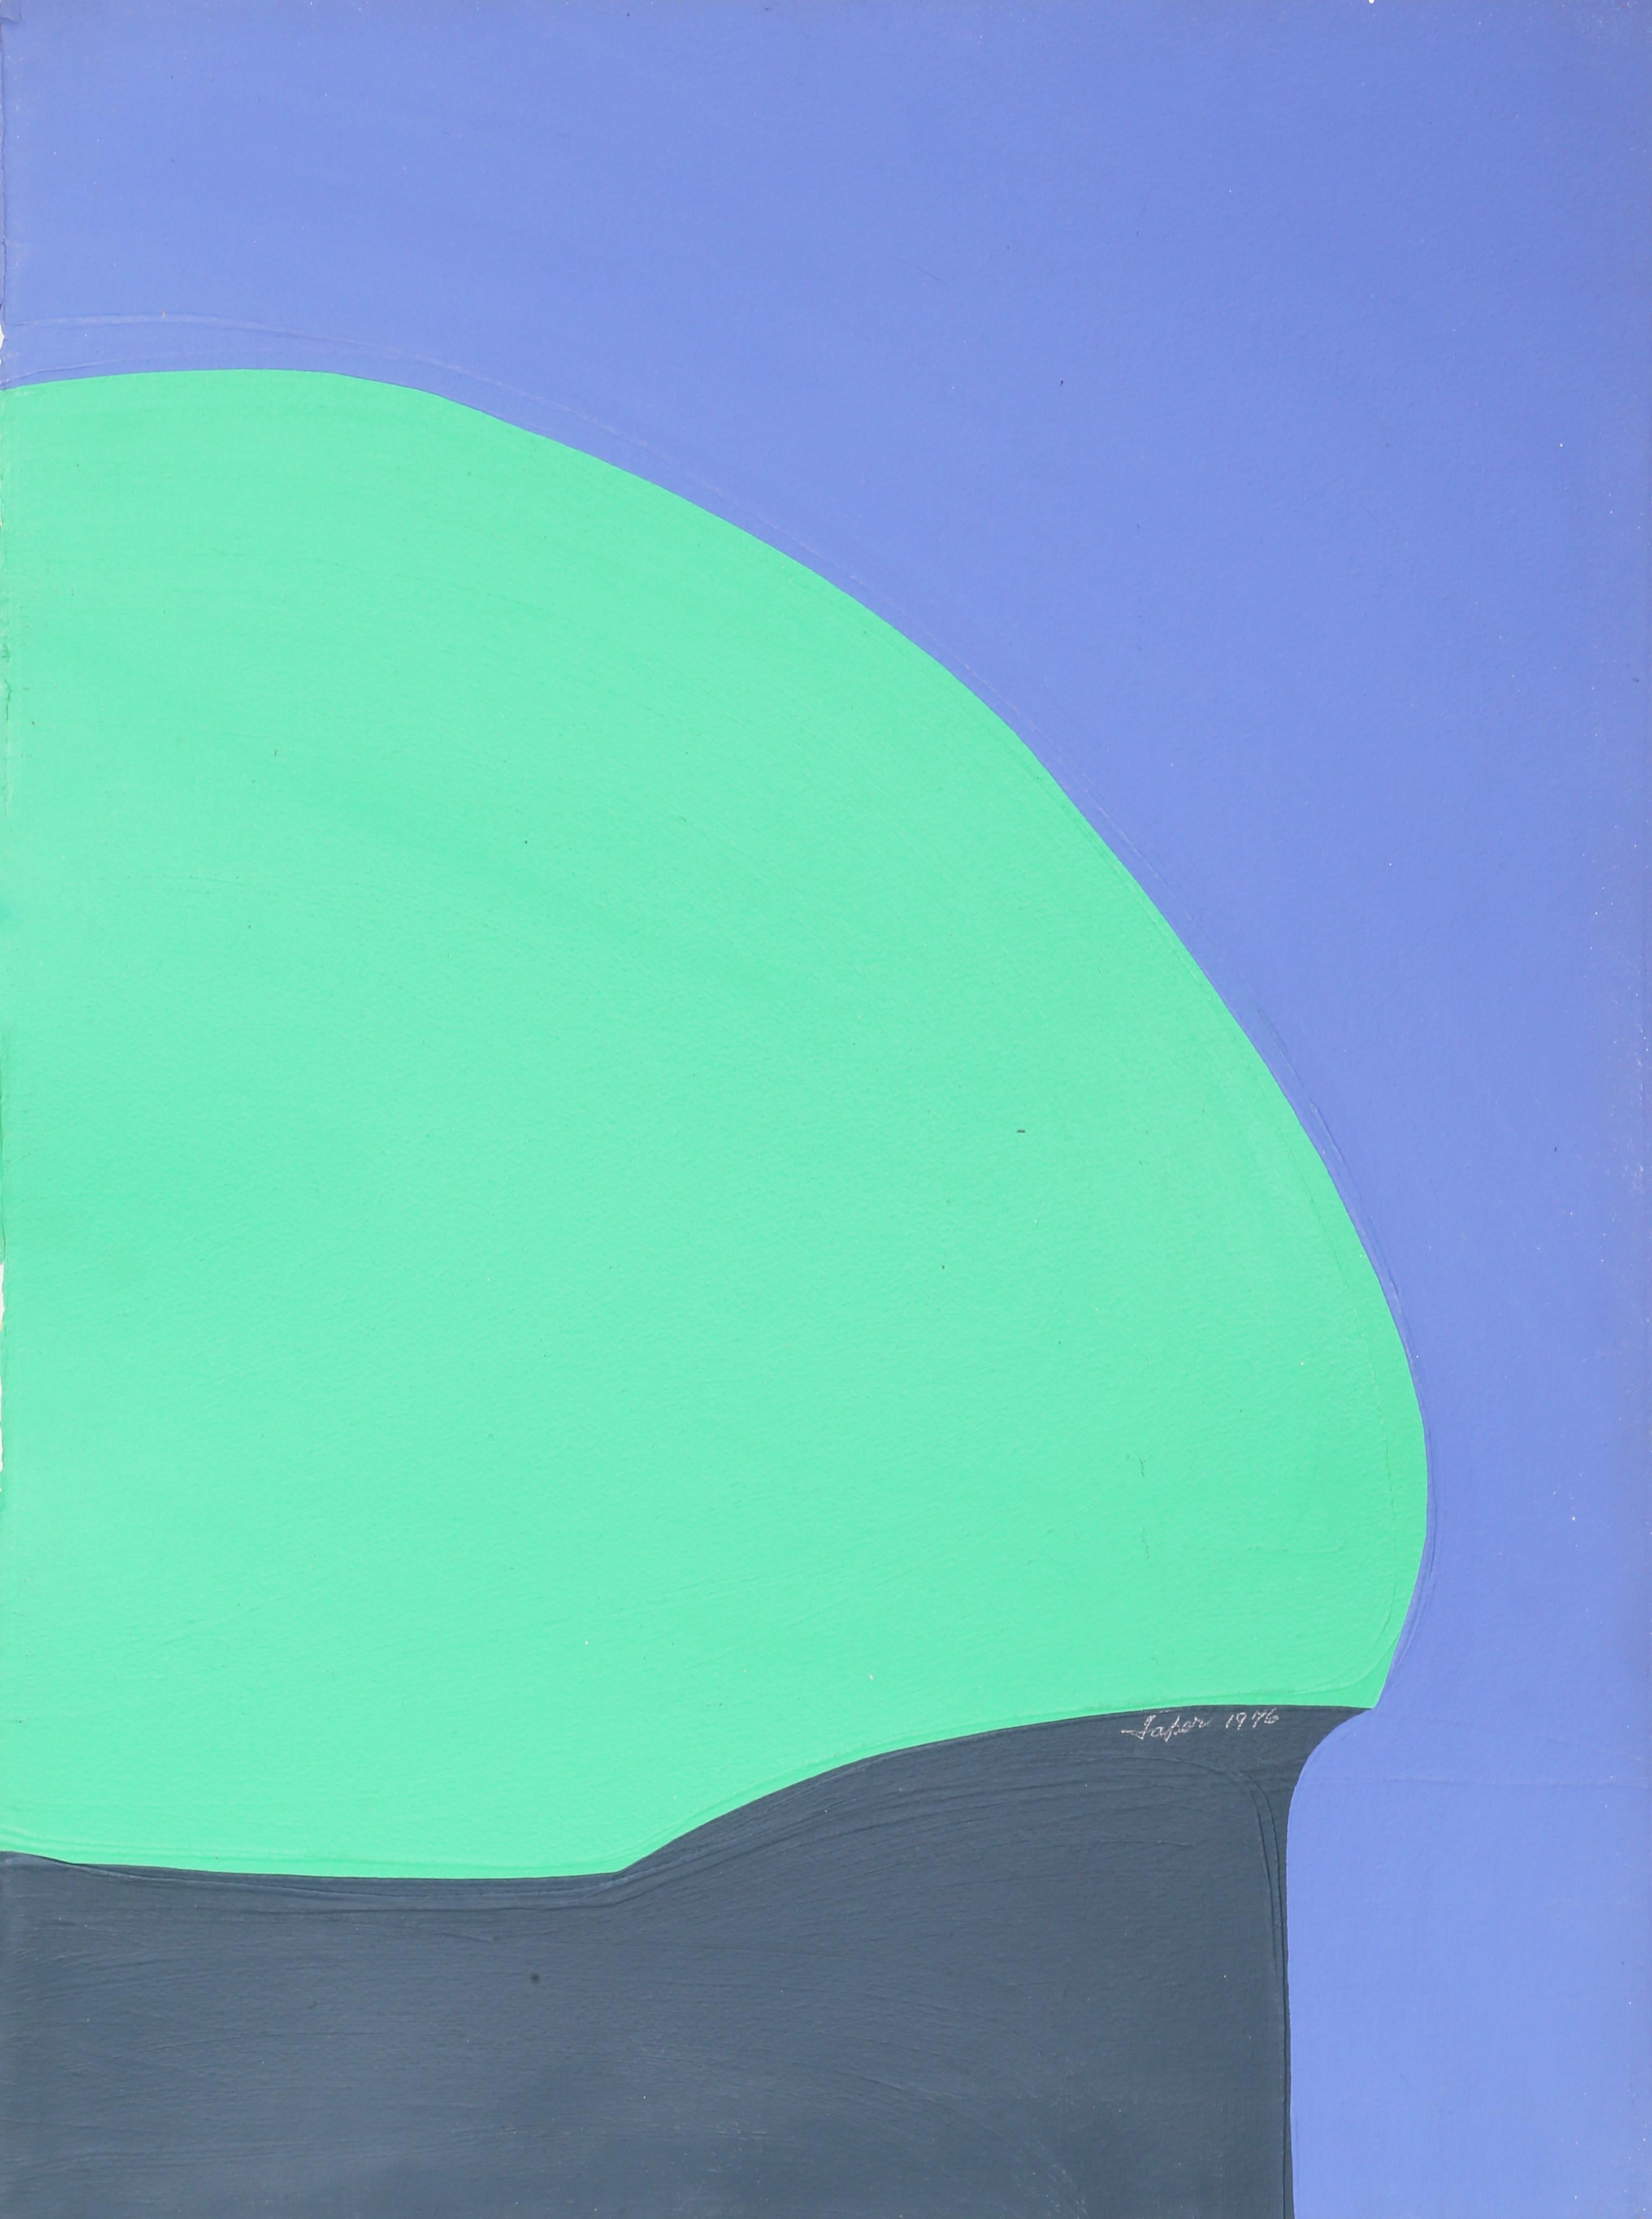 This acrylic painting by Geri Taper uses just three colors in flat expanses to fill the composition. The objects perhaps resemble a grassy cliff set against a blue sky. This piece is signed by the artist of the front and verso.

Green Cap
Geri